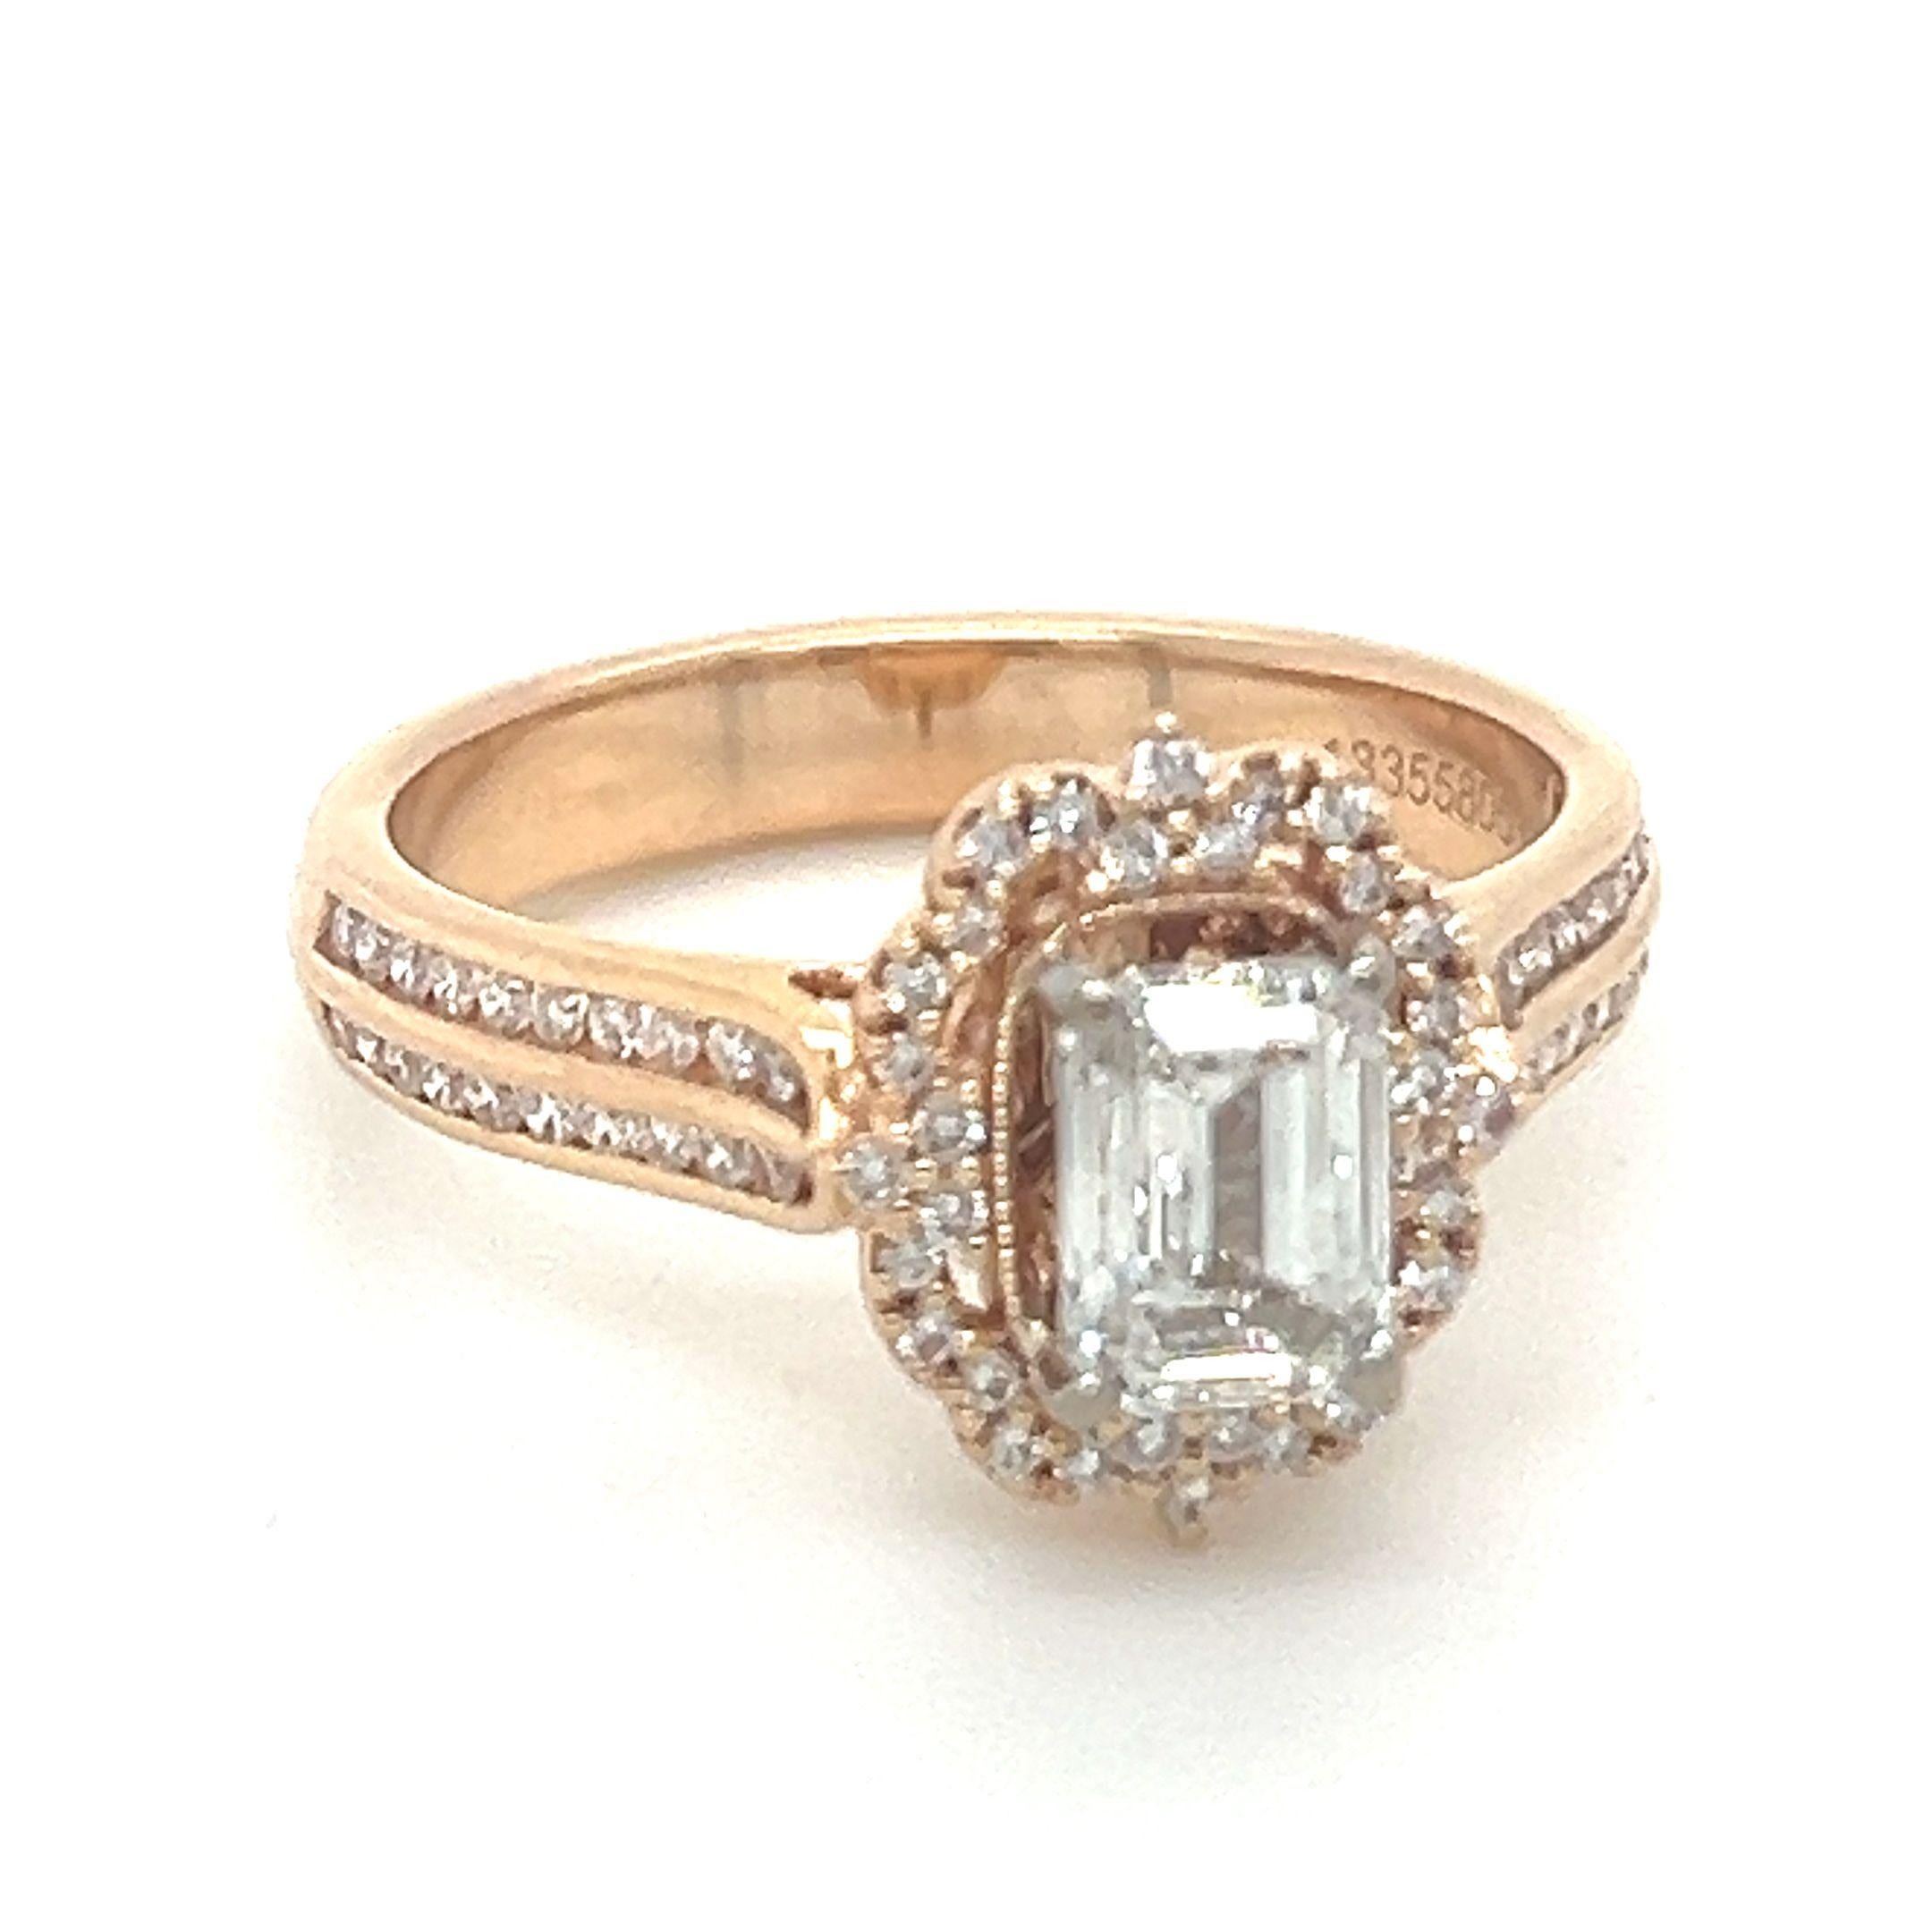 A GIA Emerald Cut Diamond Cluster Ring, four claw set in 18ct rose gold within a border of 32 round brilliant cut diamonds and with 40 round brilliant cut diamonds channel set in two rows down the shoulders on a 3.5mm band.

GIA report 1335580532